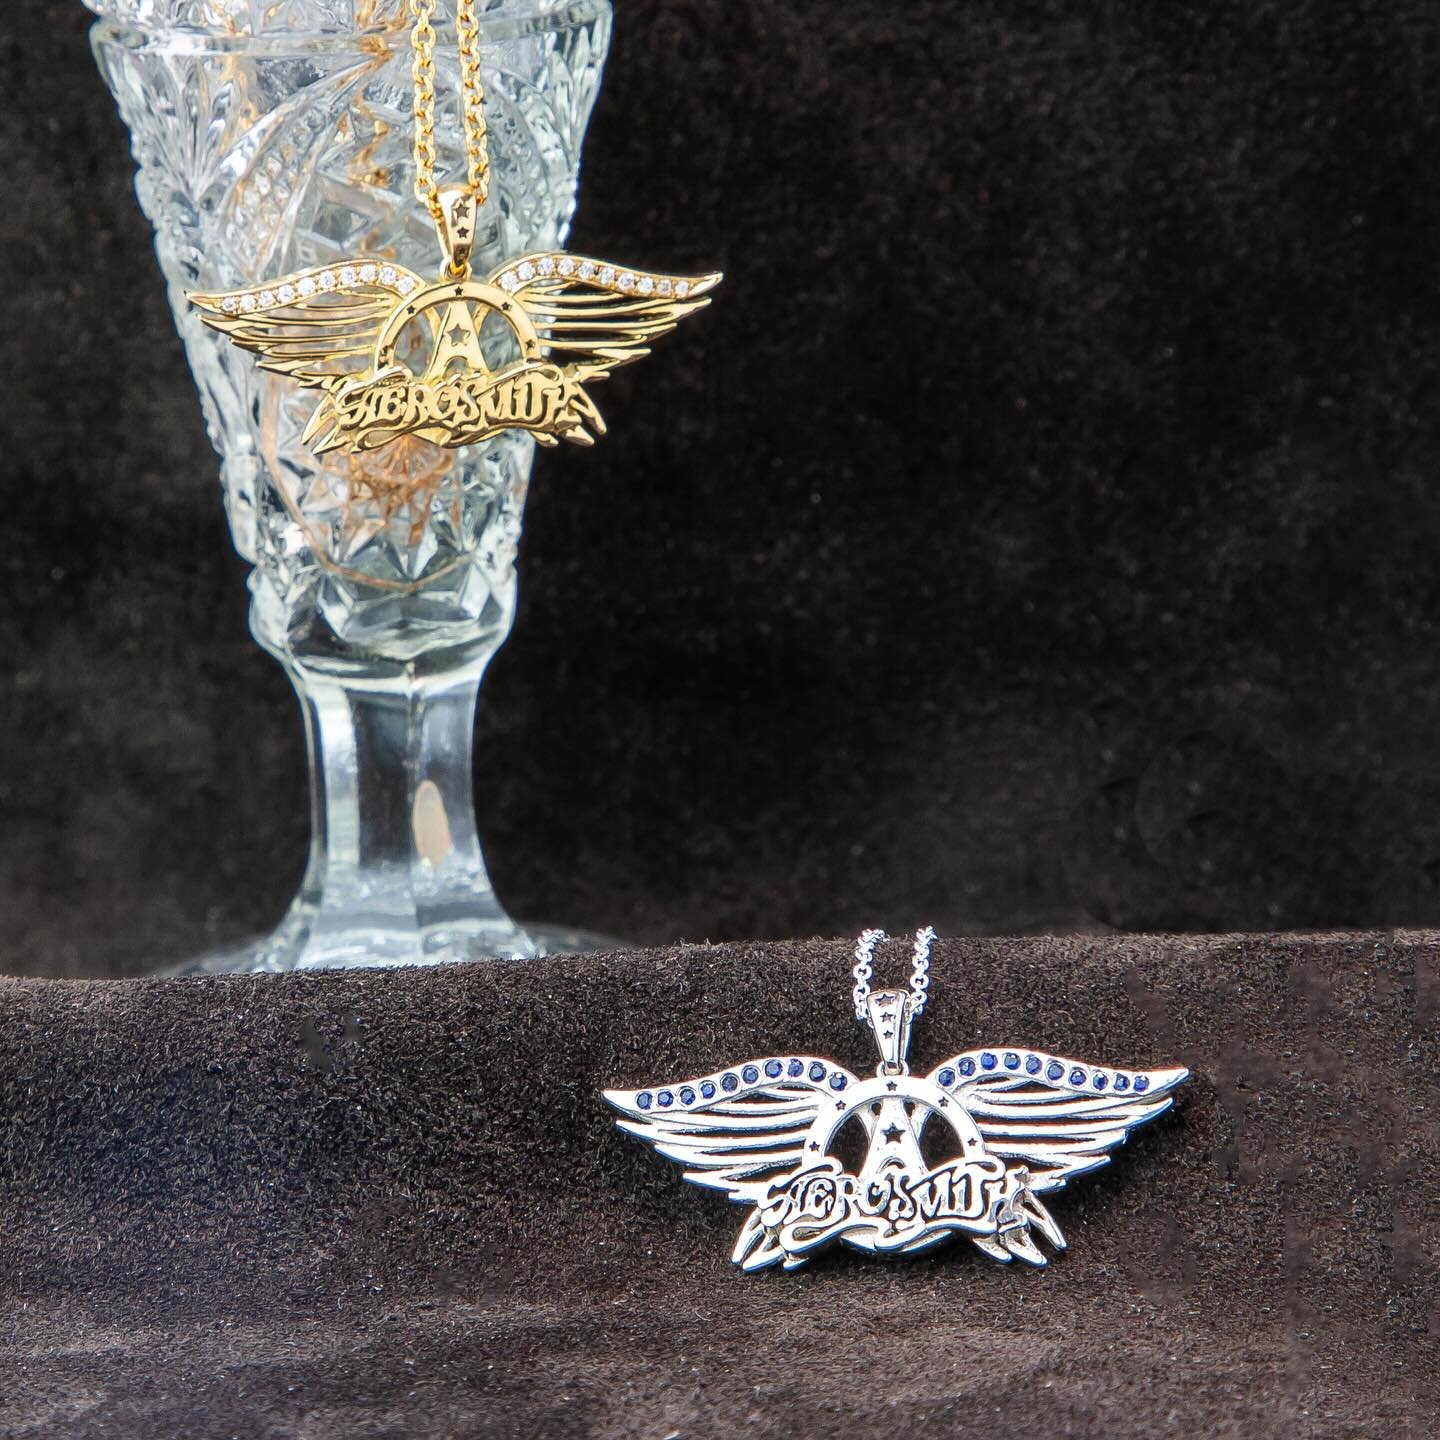 Aerosmith Anniversary Wings 🪽encapsulate five decades of rock style. Meticulously crafted in solid gold or sterling silver, they shine with exquisite diamonds or genuine blue sapphires selected for their exceptional quality. 
DM to purchase 💬

#roc